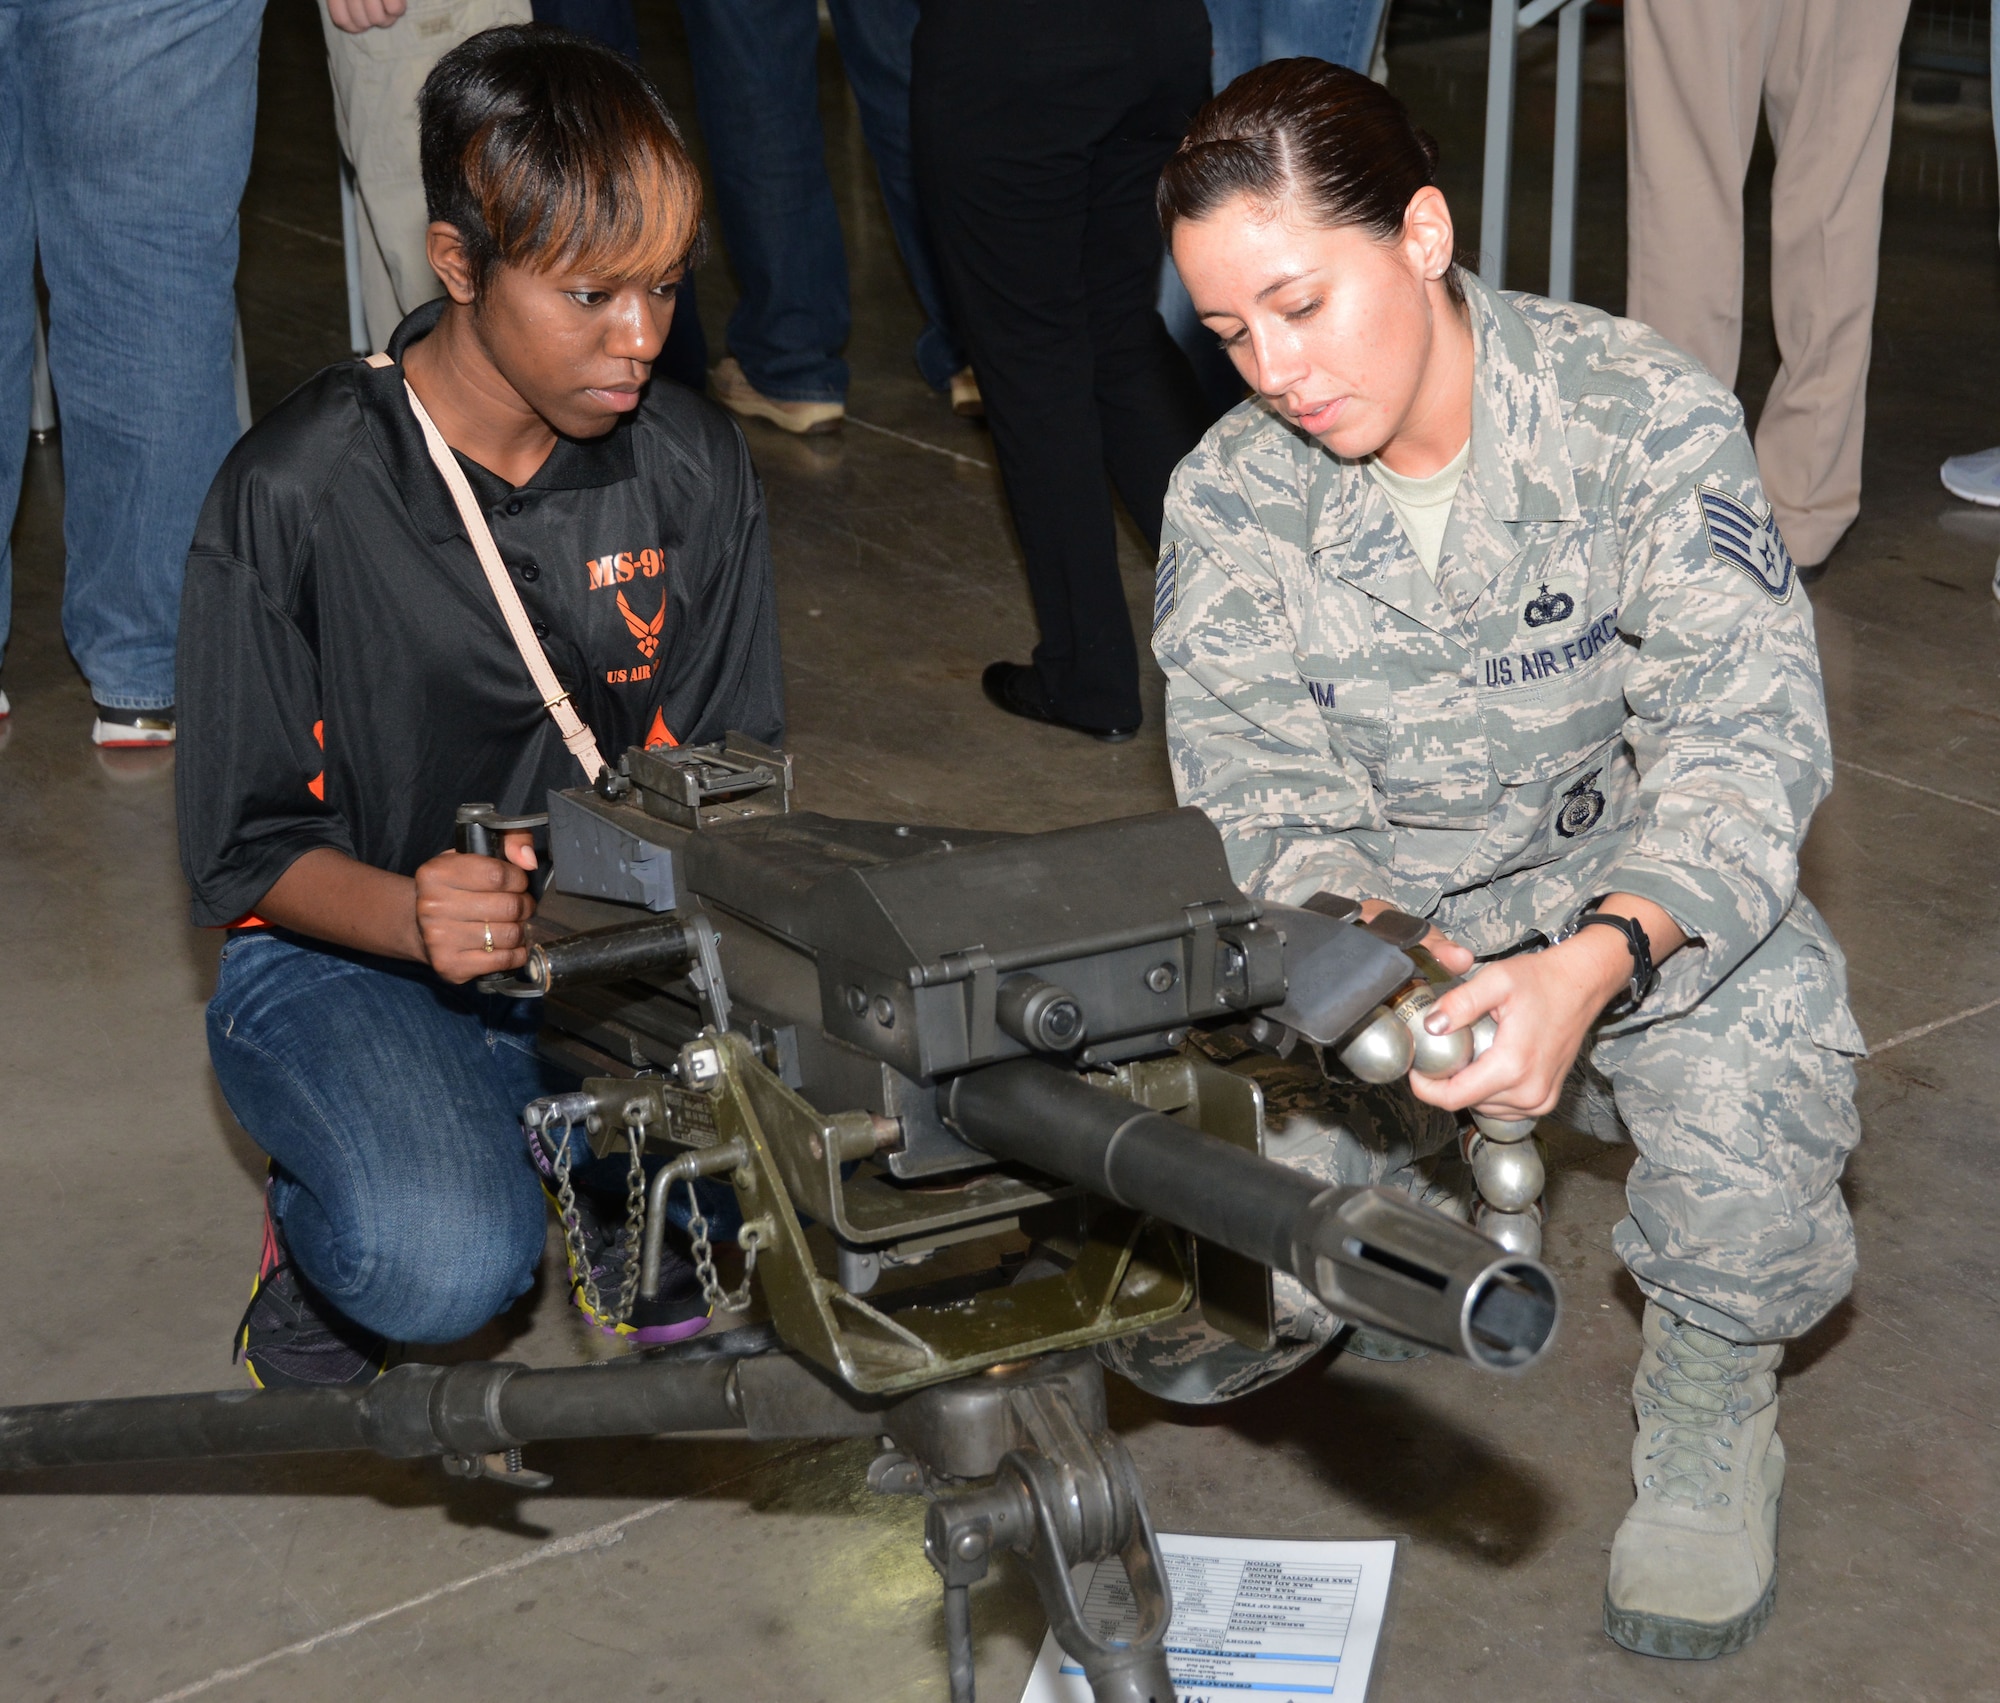 Staff Sgt. Martha L. Klemm, 610th Security Forces Squadron weapons instructor, instructs a student from Madison, Mississippi, May 29, 2014, Naval Air Station Fort Worth Joint Reserve Base, Texas. Members of the Junior Reserve Officer Training Corps, Madison Central High School, visit the 301st Fighter Wing to learn about the different career fields the Air Force has to offer. (U.S. Air Force photo by Staff Sgt. Samantha A. Mathison)